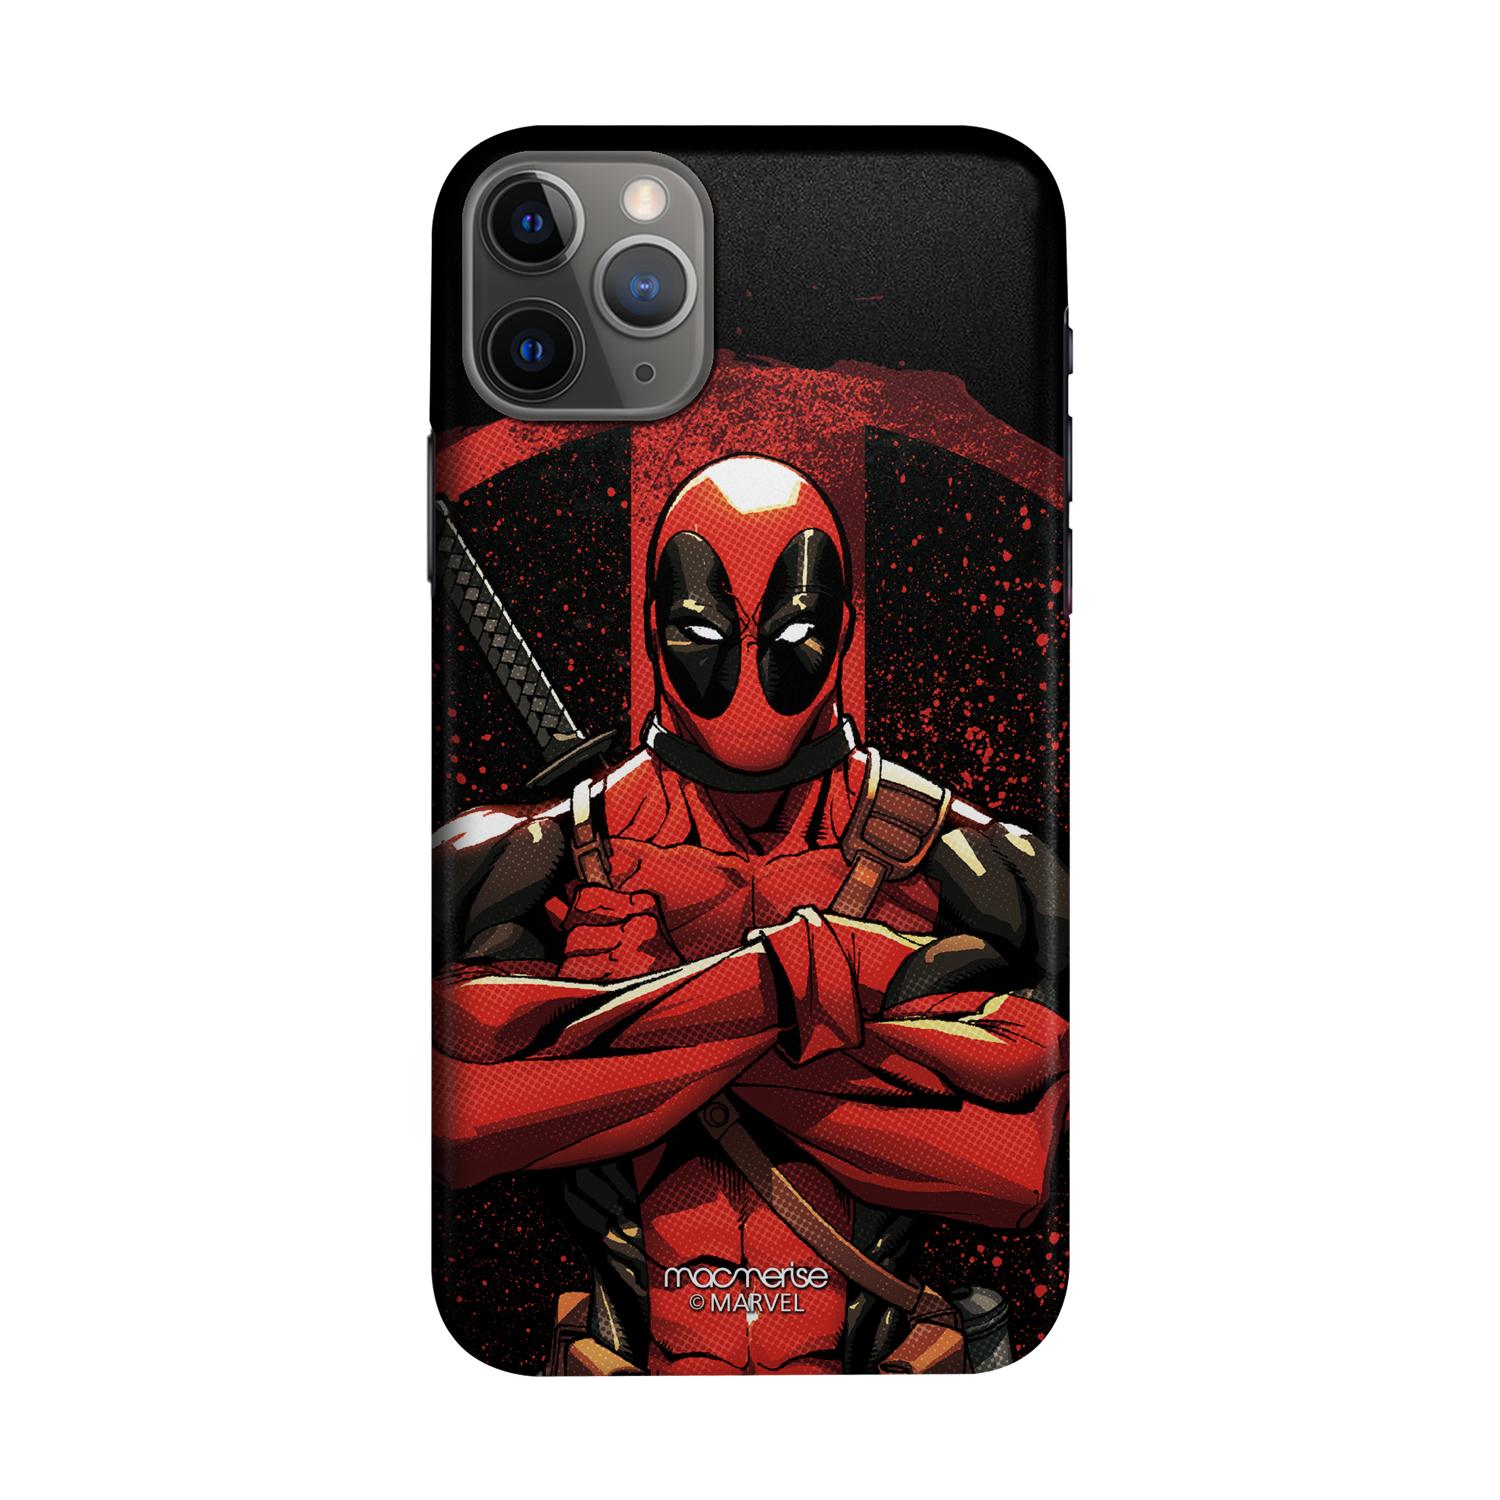 Buy Deadpool Stance - Sleek Phone Case for iPhone 11 Pro Max Online